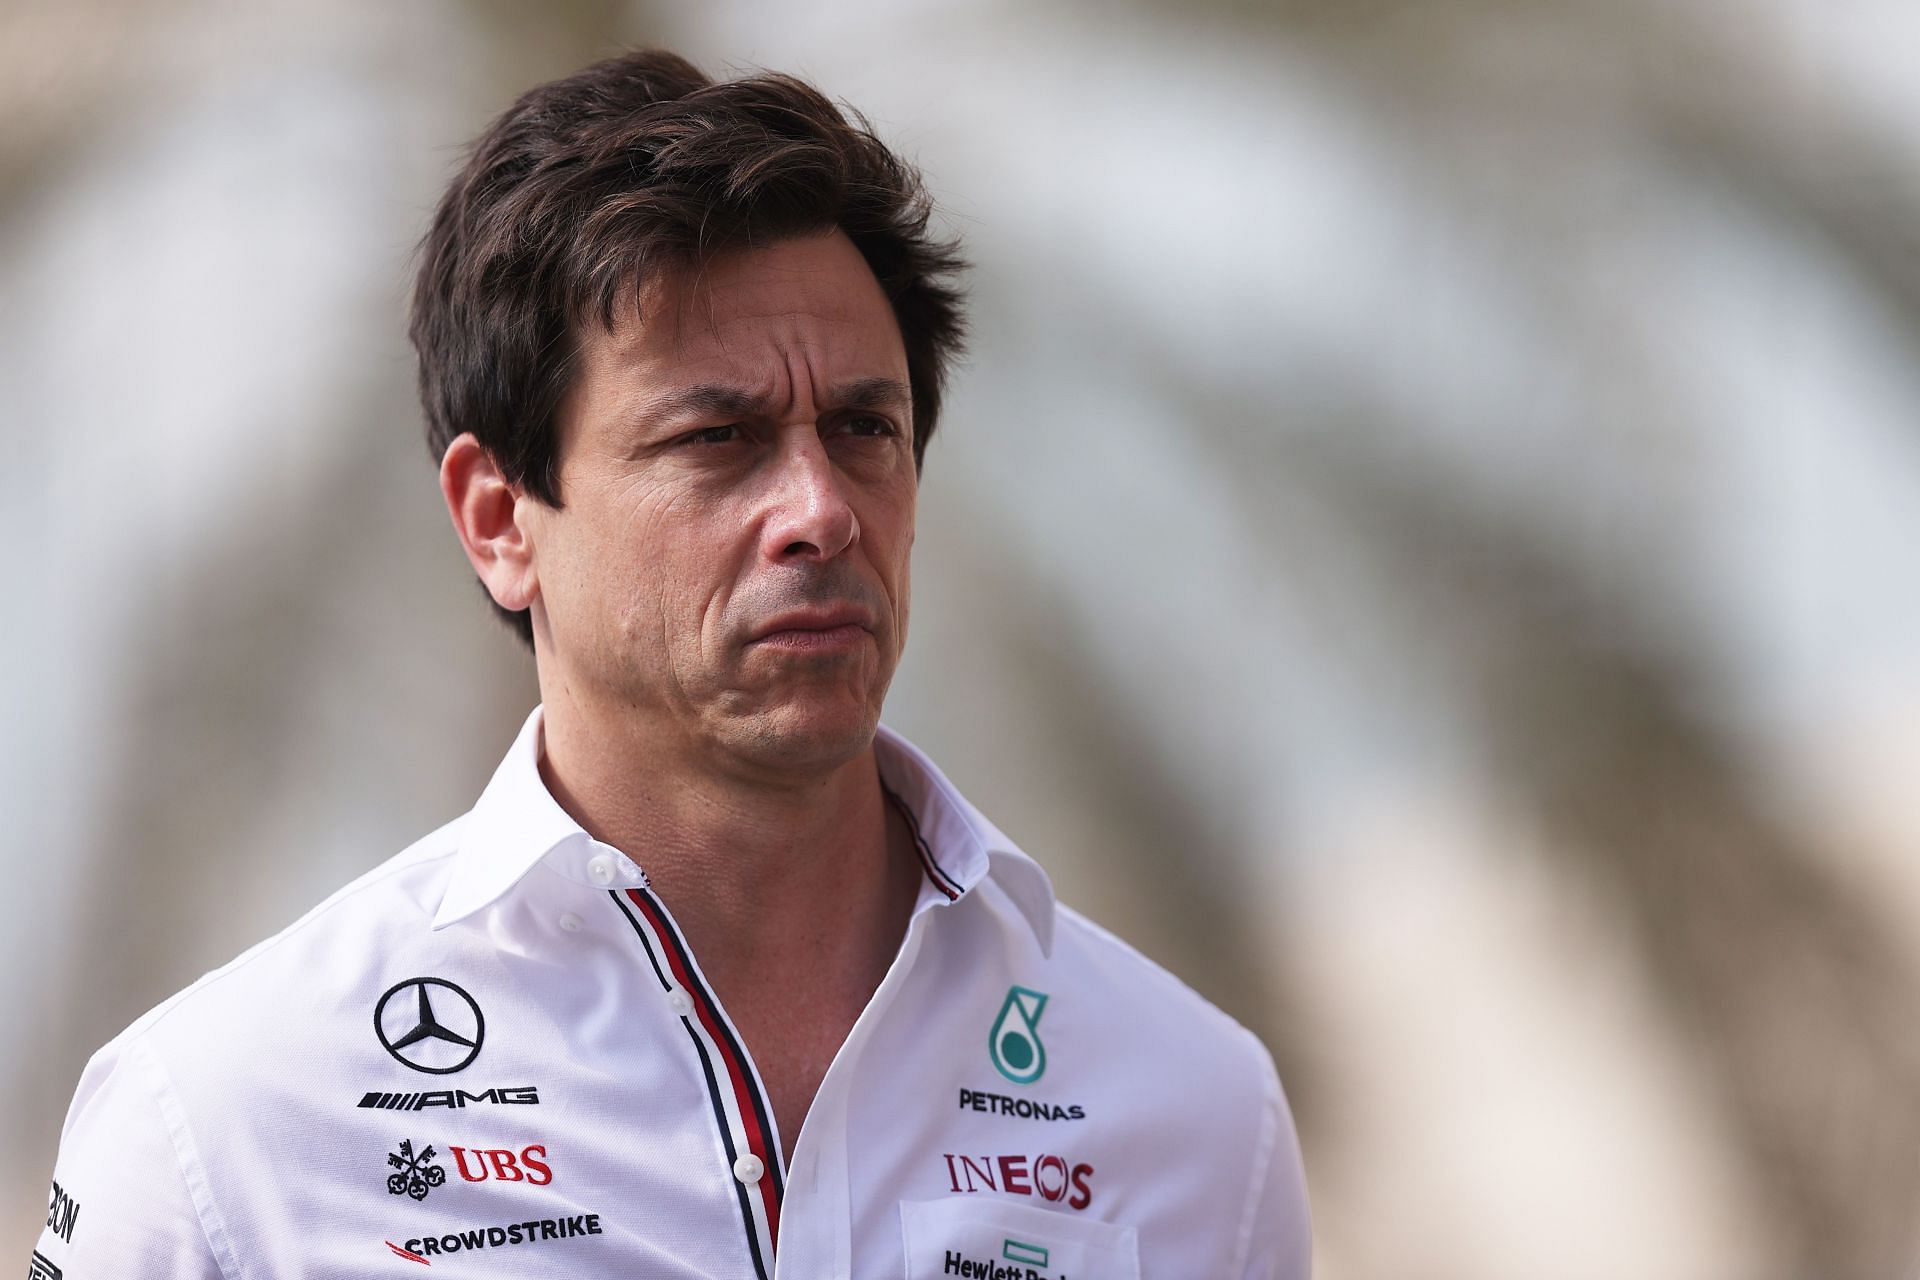 Mercedes boss Toto Wolff before the 2021 Abu Dhabi GP (Photo by Lars Baron/Getty Images)